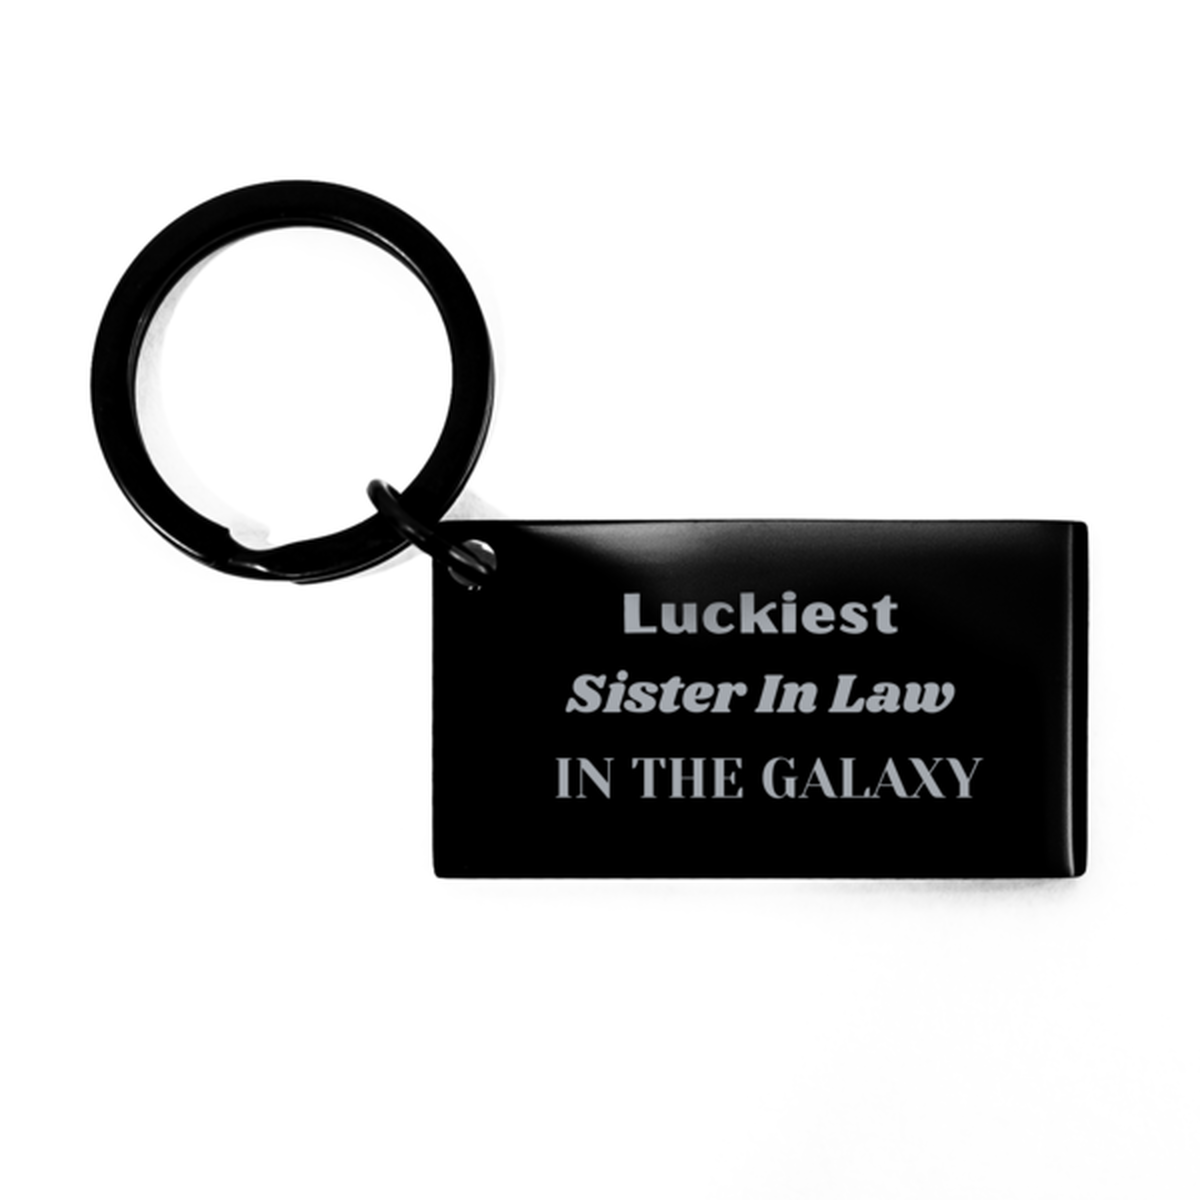 Luckiest Sister In Law in the Galaxy, To My Sister In Law Engraved Gifts, Christmas Sister In Law Keychain Gifts, X-mas Birthday Unique Gifts For Sister In Law Men Women